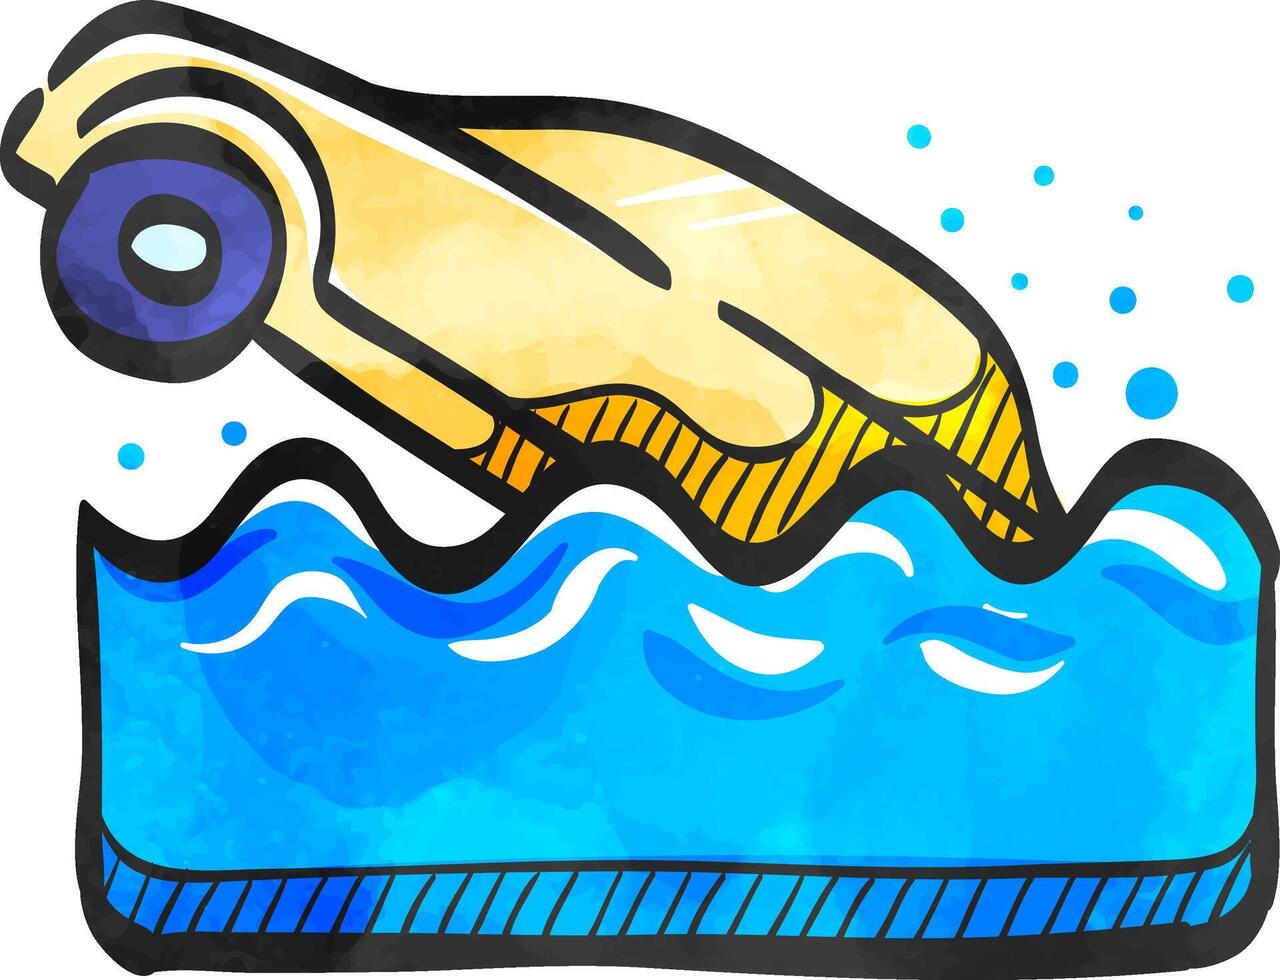 Drowned car icon in color drawing. Automotive natural accident flood insurance claim vector